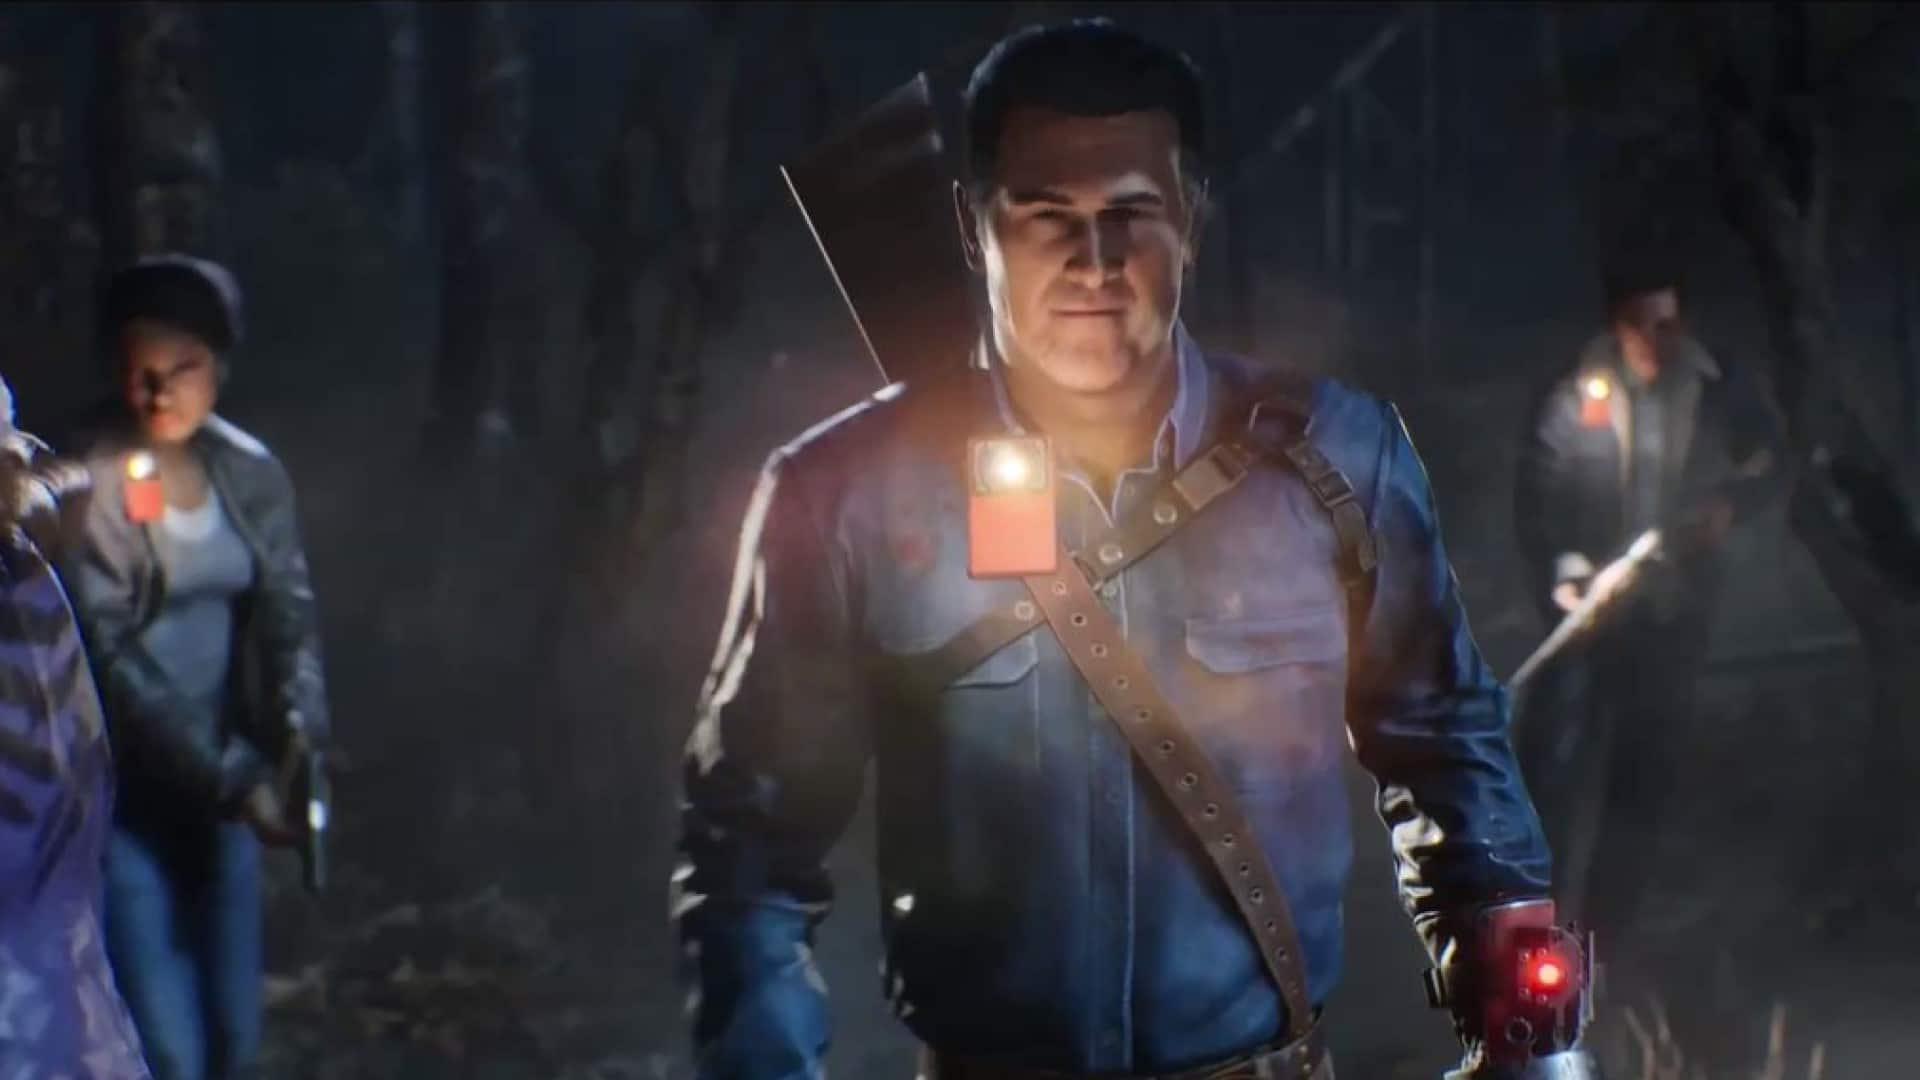 Evil Dead The Game Update 1.52